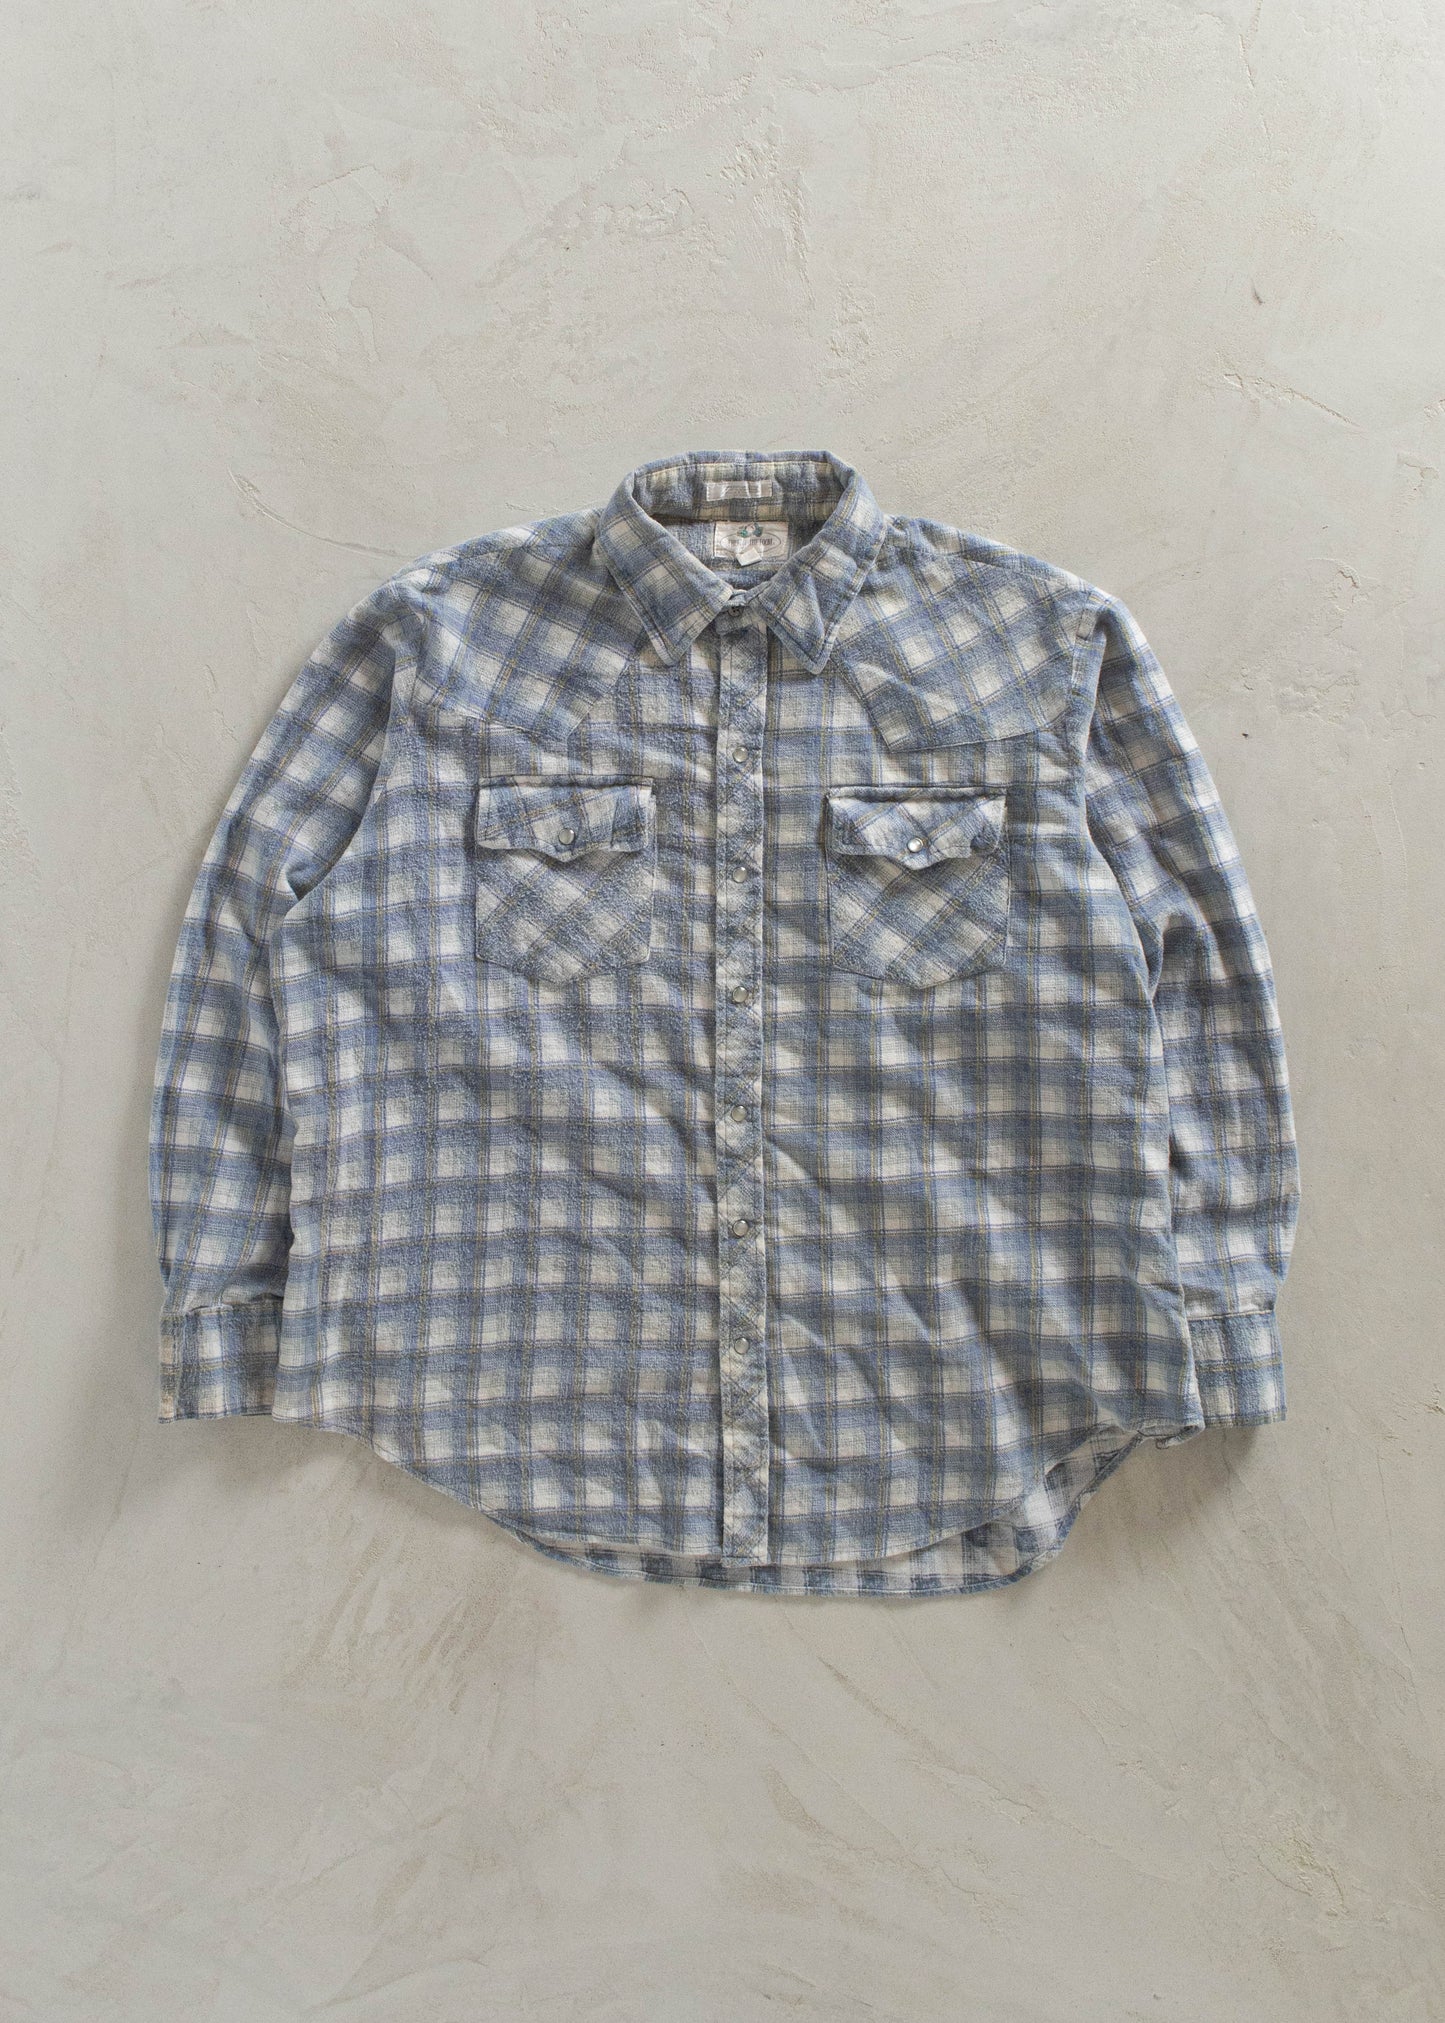 1980s Fruit of The Loom Cotton Flannel Button Up Shirt Size M/L